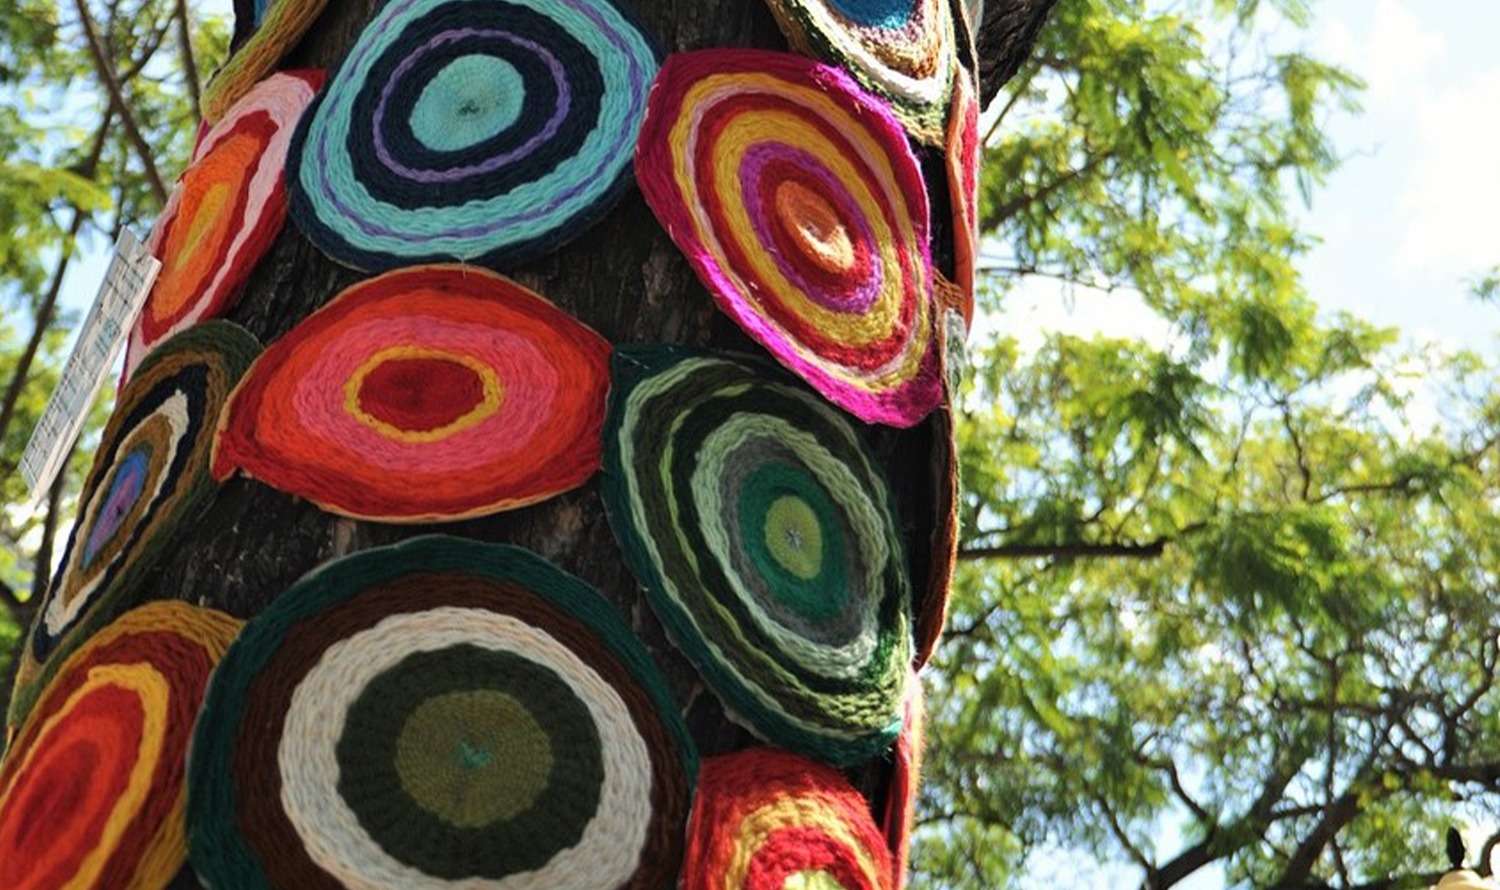 Many colorful, homemade round seat cushions hang on a tree.